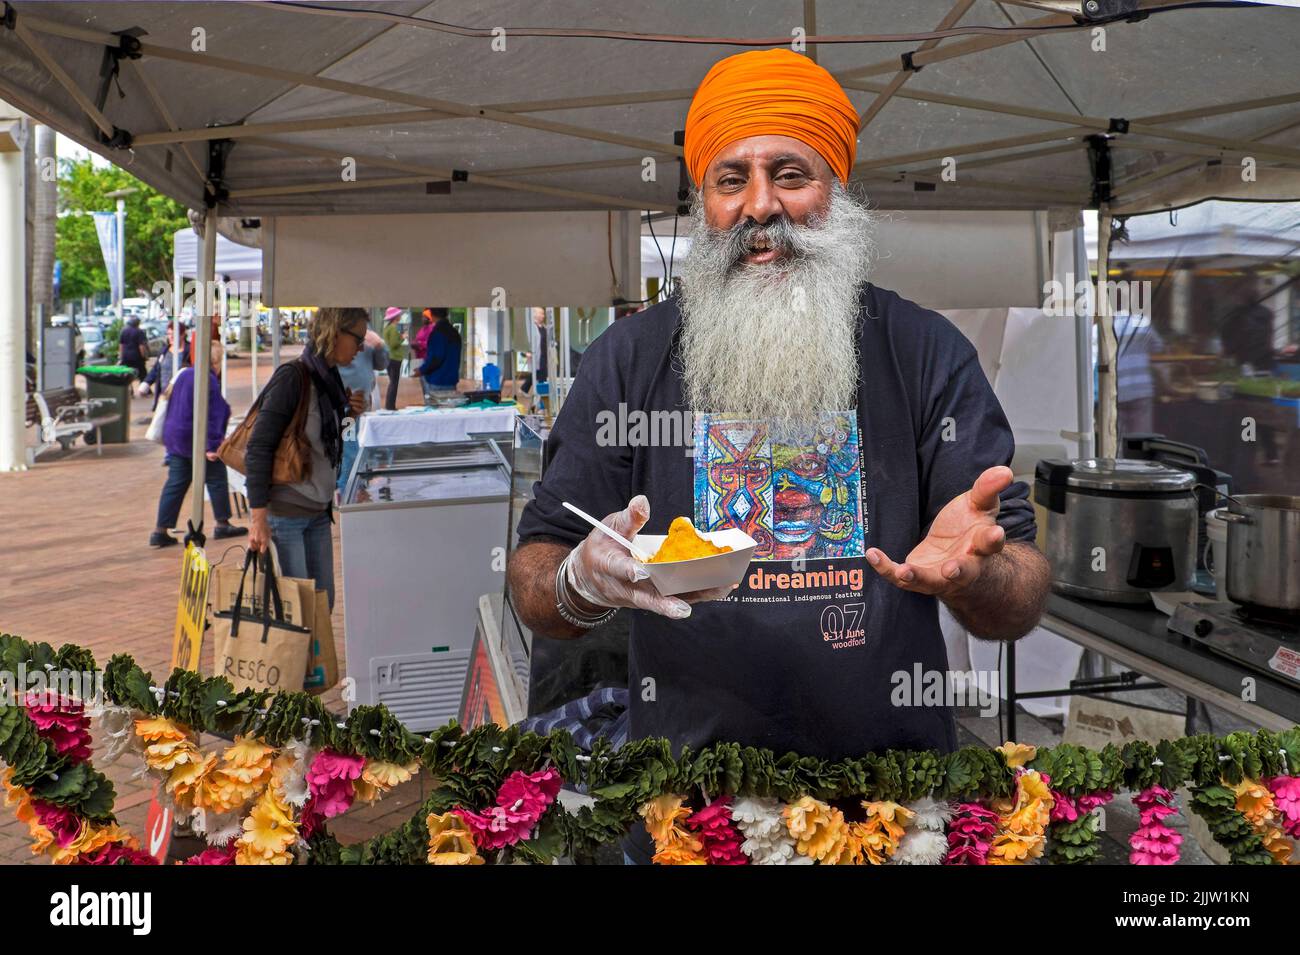 John Arkin, Sikh Businessman and Town Councillor, Coffs Harbour working on his samosa stall at a market in central Coffs Harbour. John, who is active politically, is a councillor on the Coffs Harbour Council and narrowly missed being elected mayor at the last elections. Stock Photo